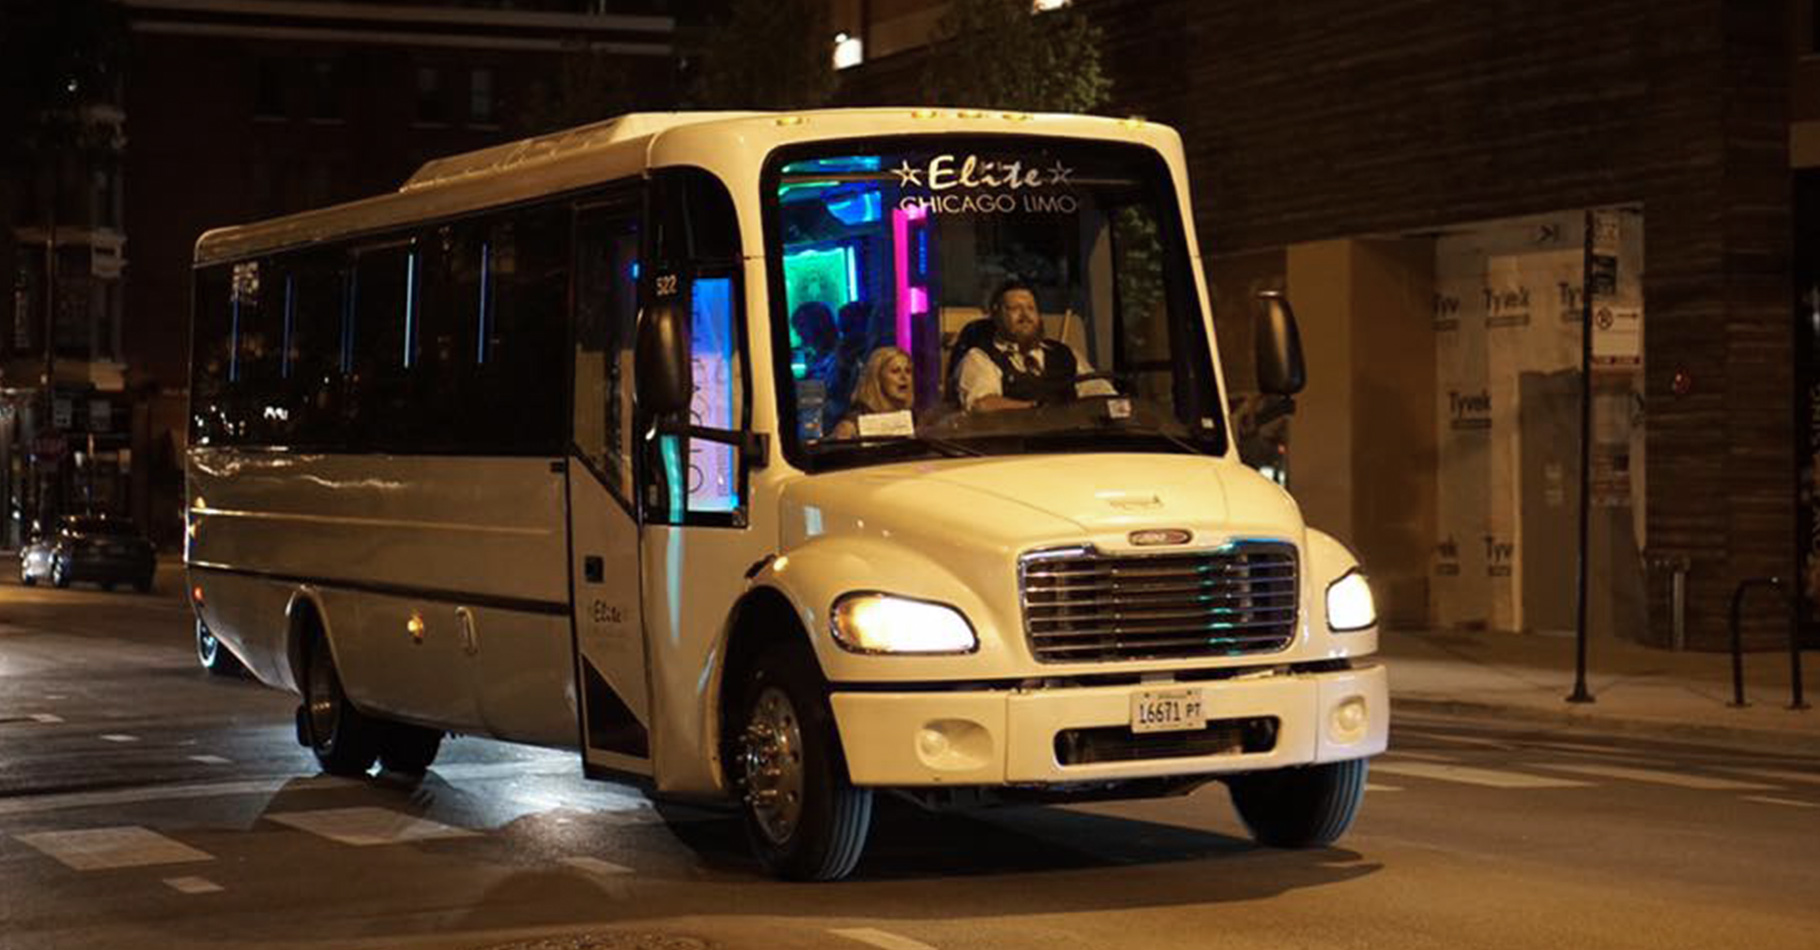 elite party bus on the street of Chicago